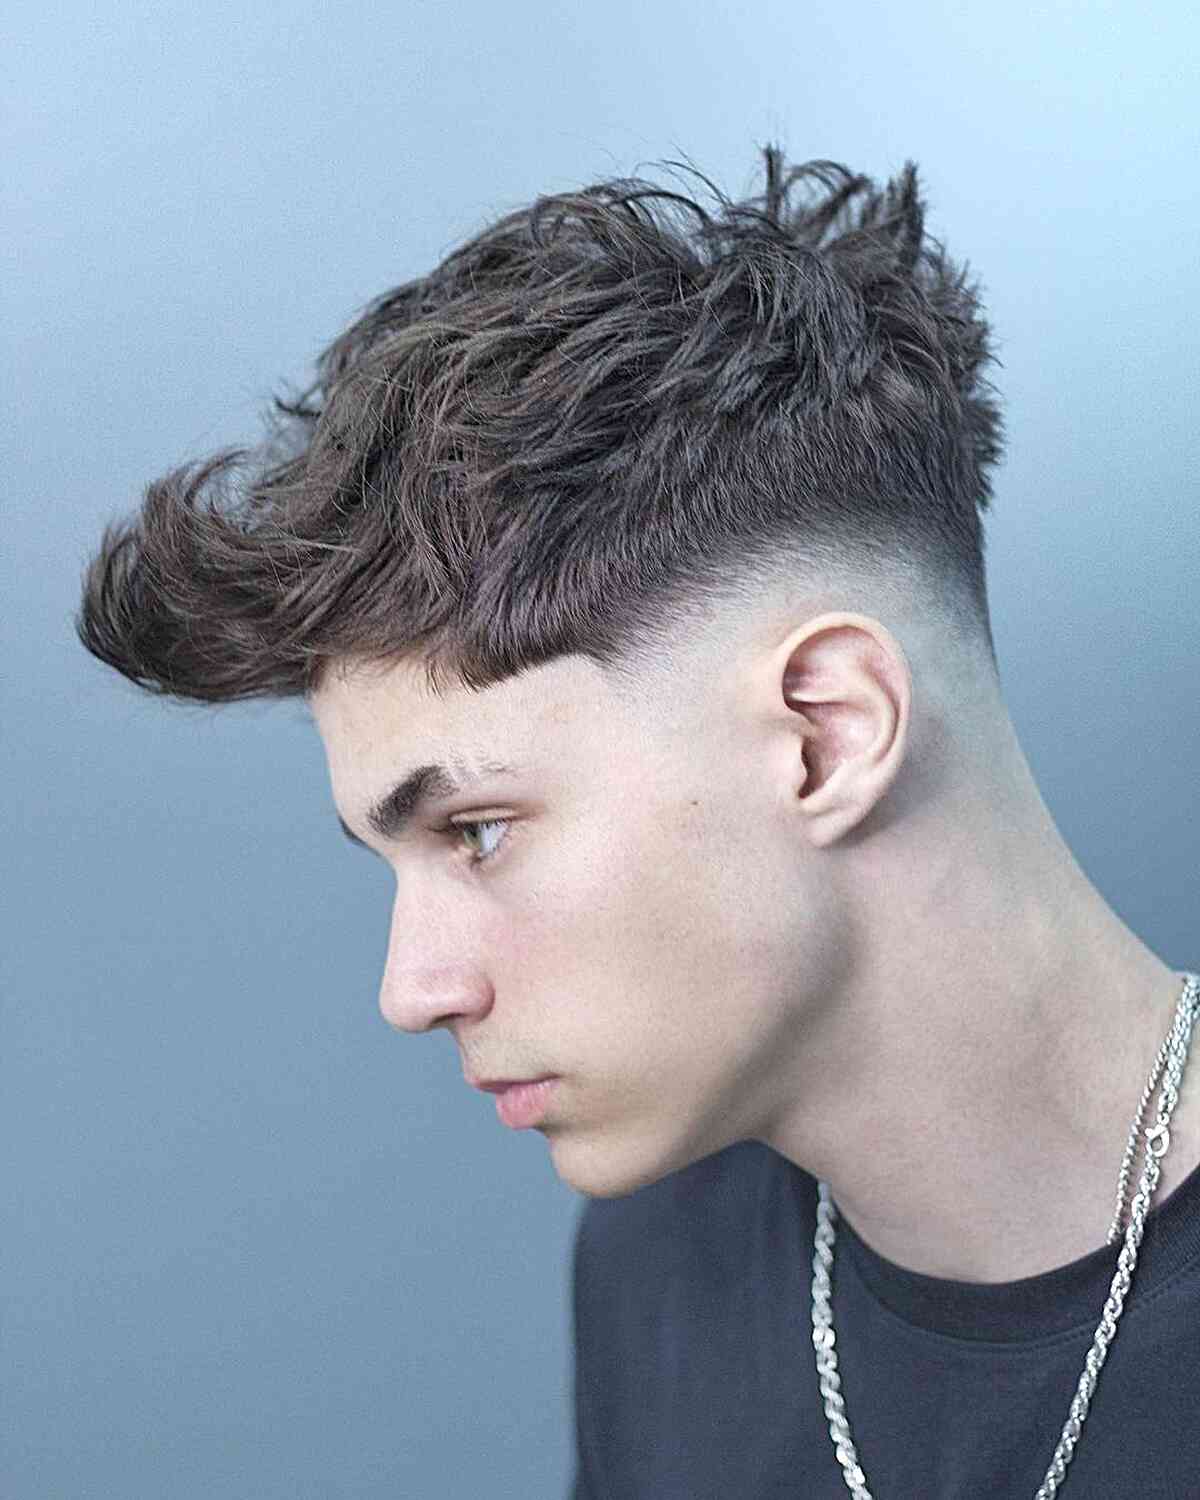 Curly and Textured Quiff for Men with Short Hair